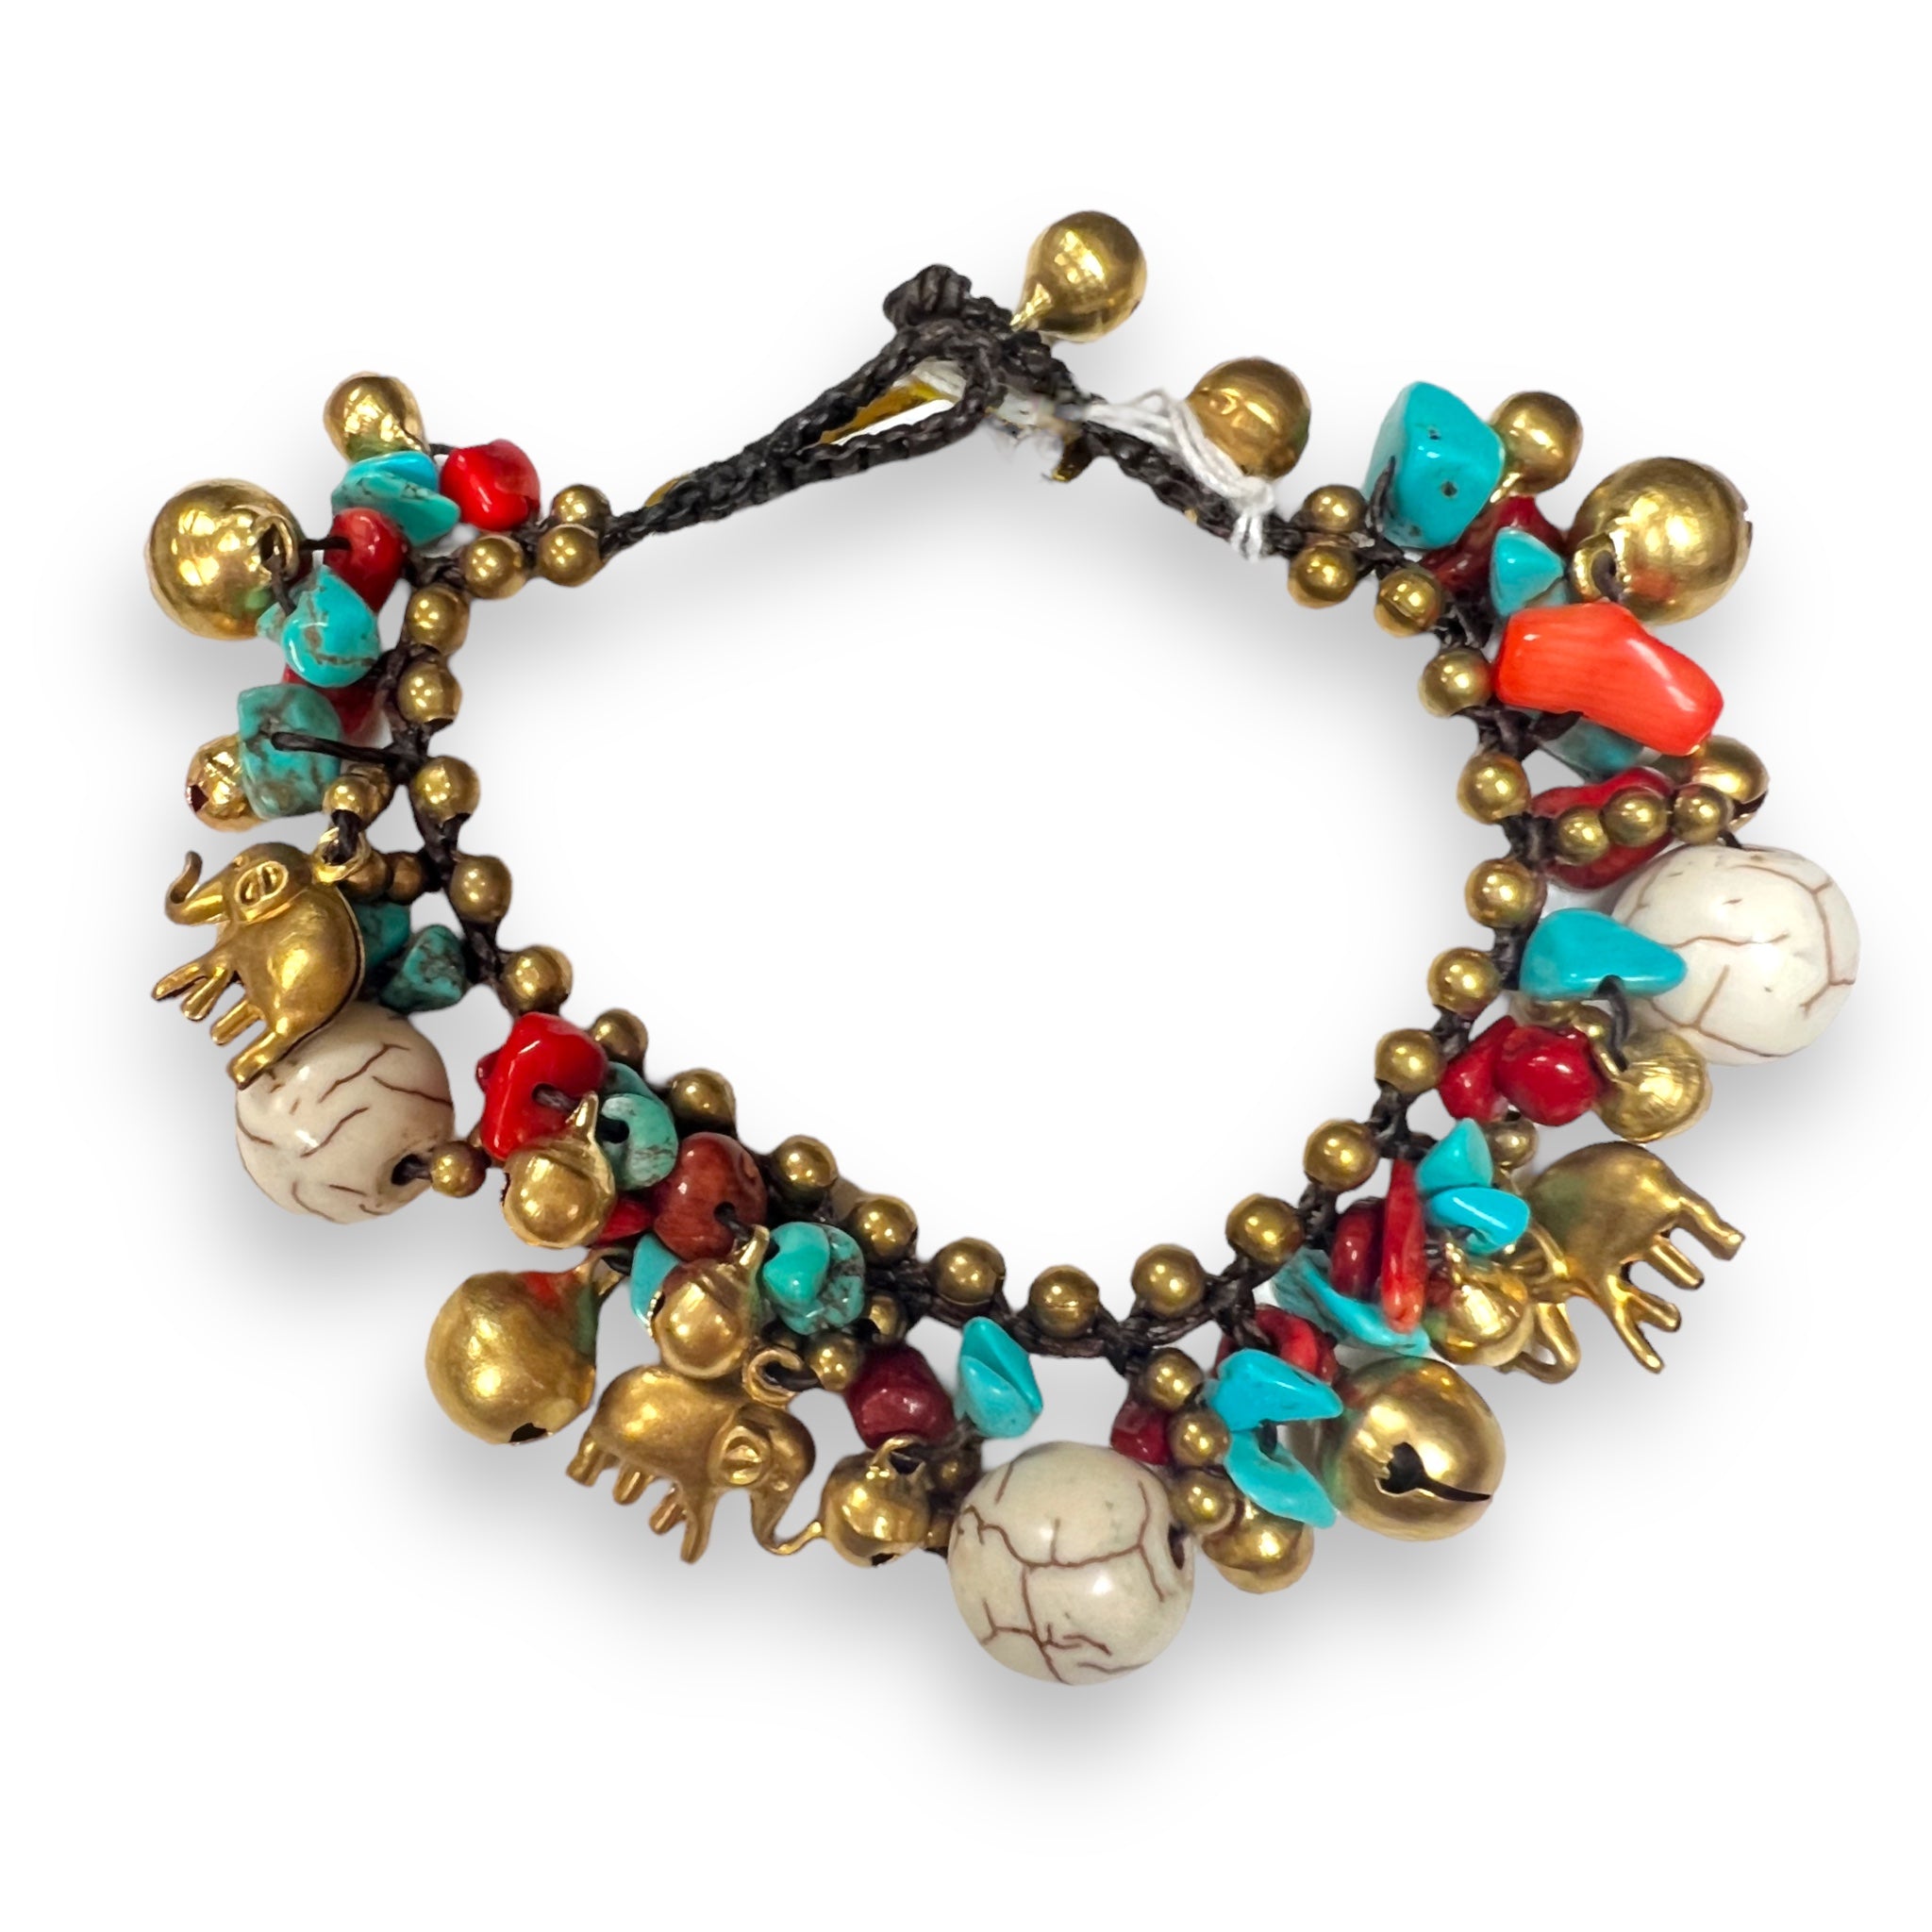 Handmade Bracelet Turquoise, Howlite, Coral Elephant Bells Charms Colorful Beads Beaded 8 Inch Jewelry